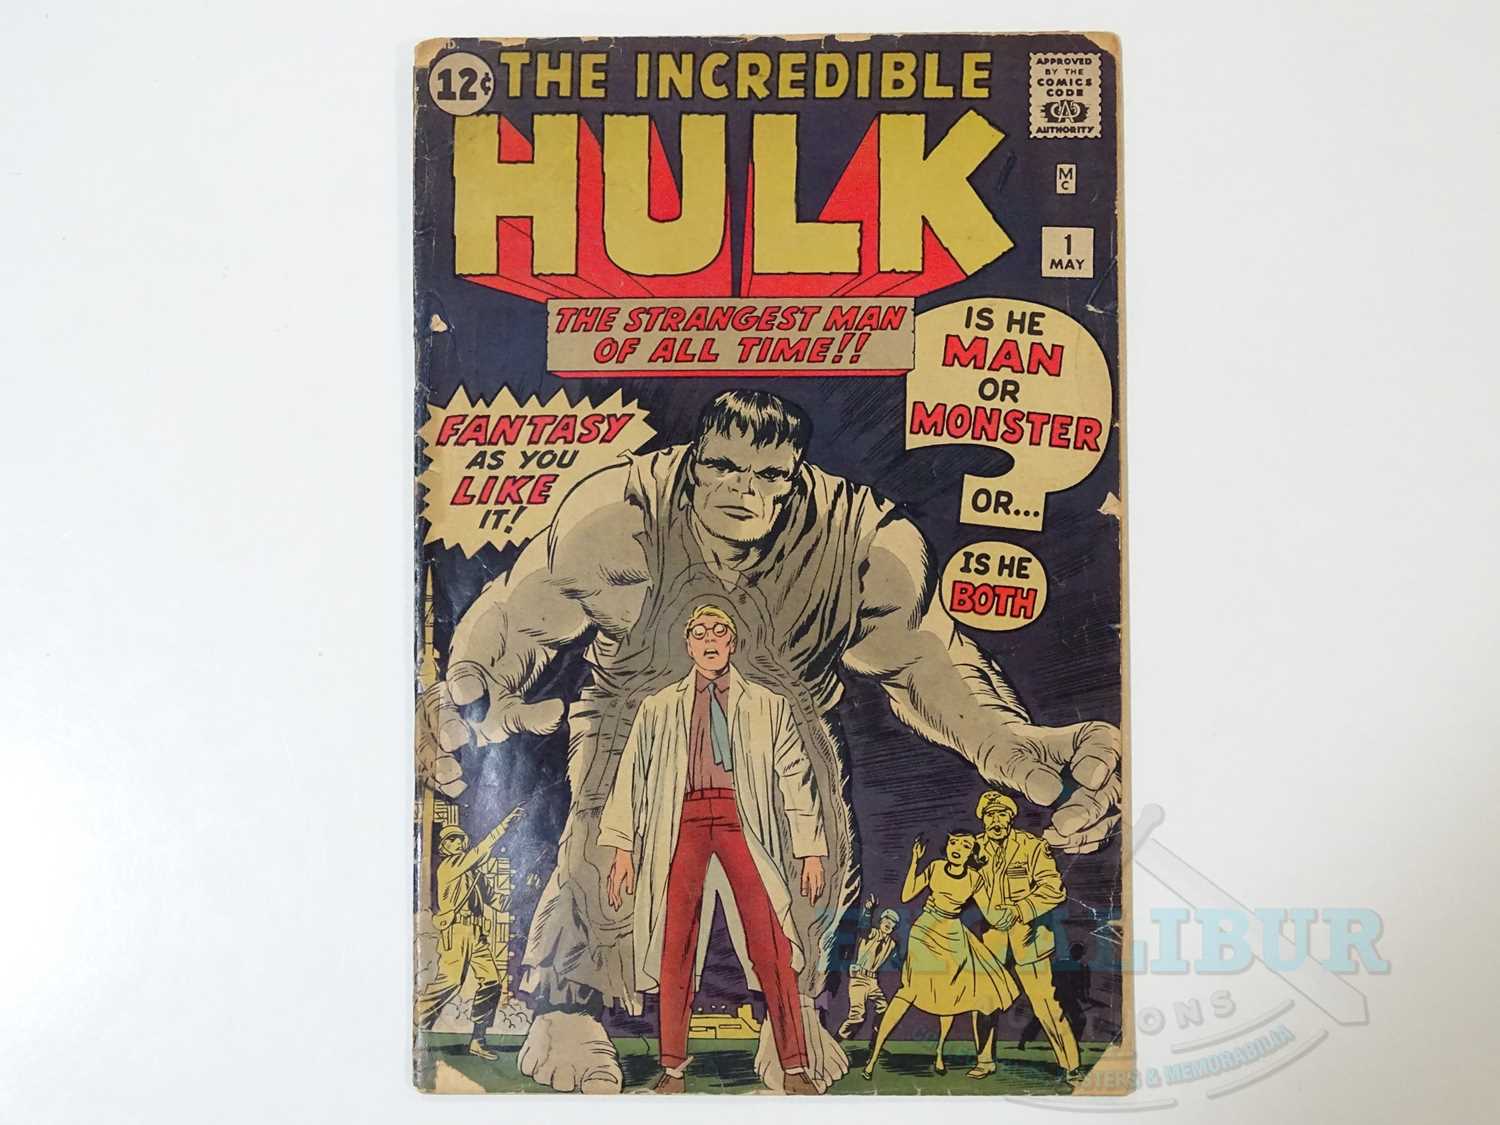 INCREDIBLE HULK #1 (1962 - MARVEL) - Origin and First appearance of the Hulk + Second only in